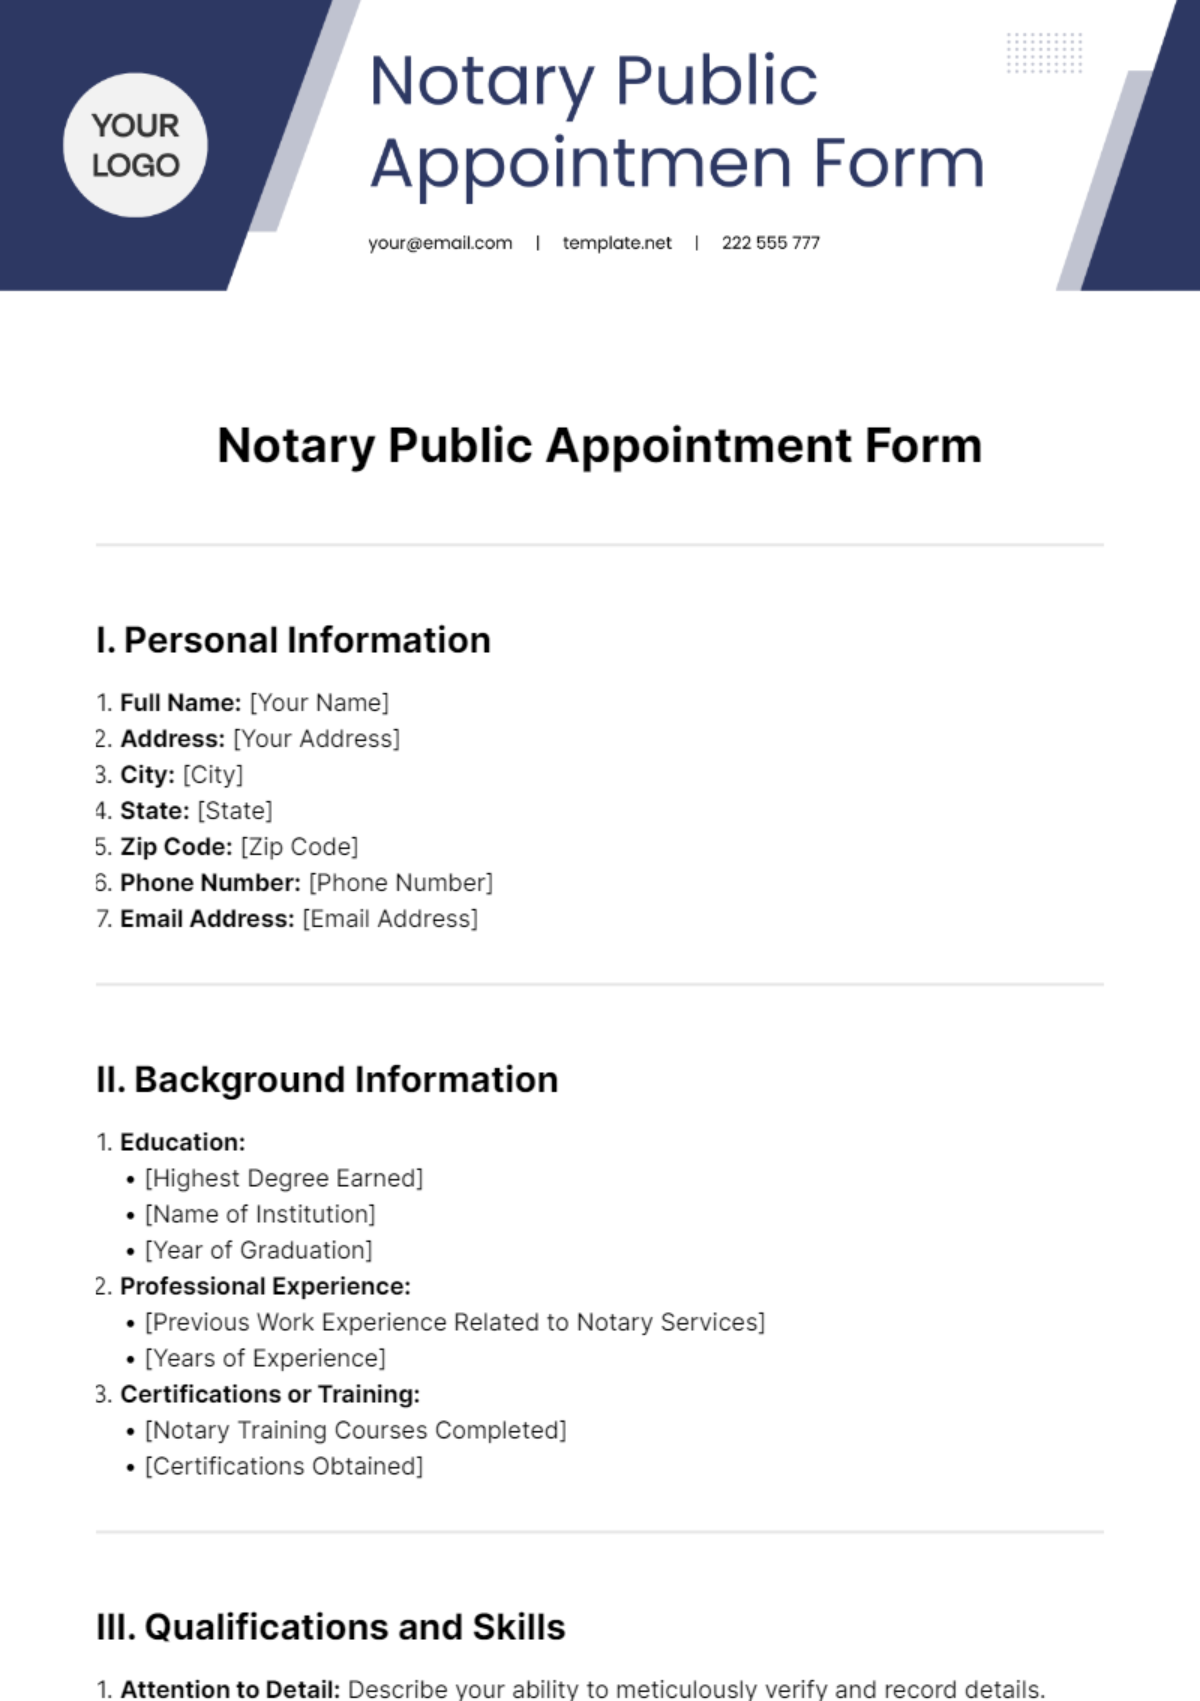 Notary Public Appointment Form Template